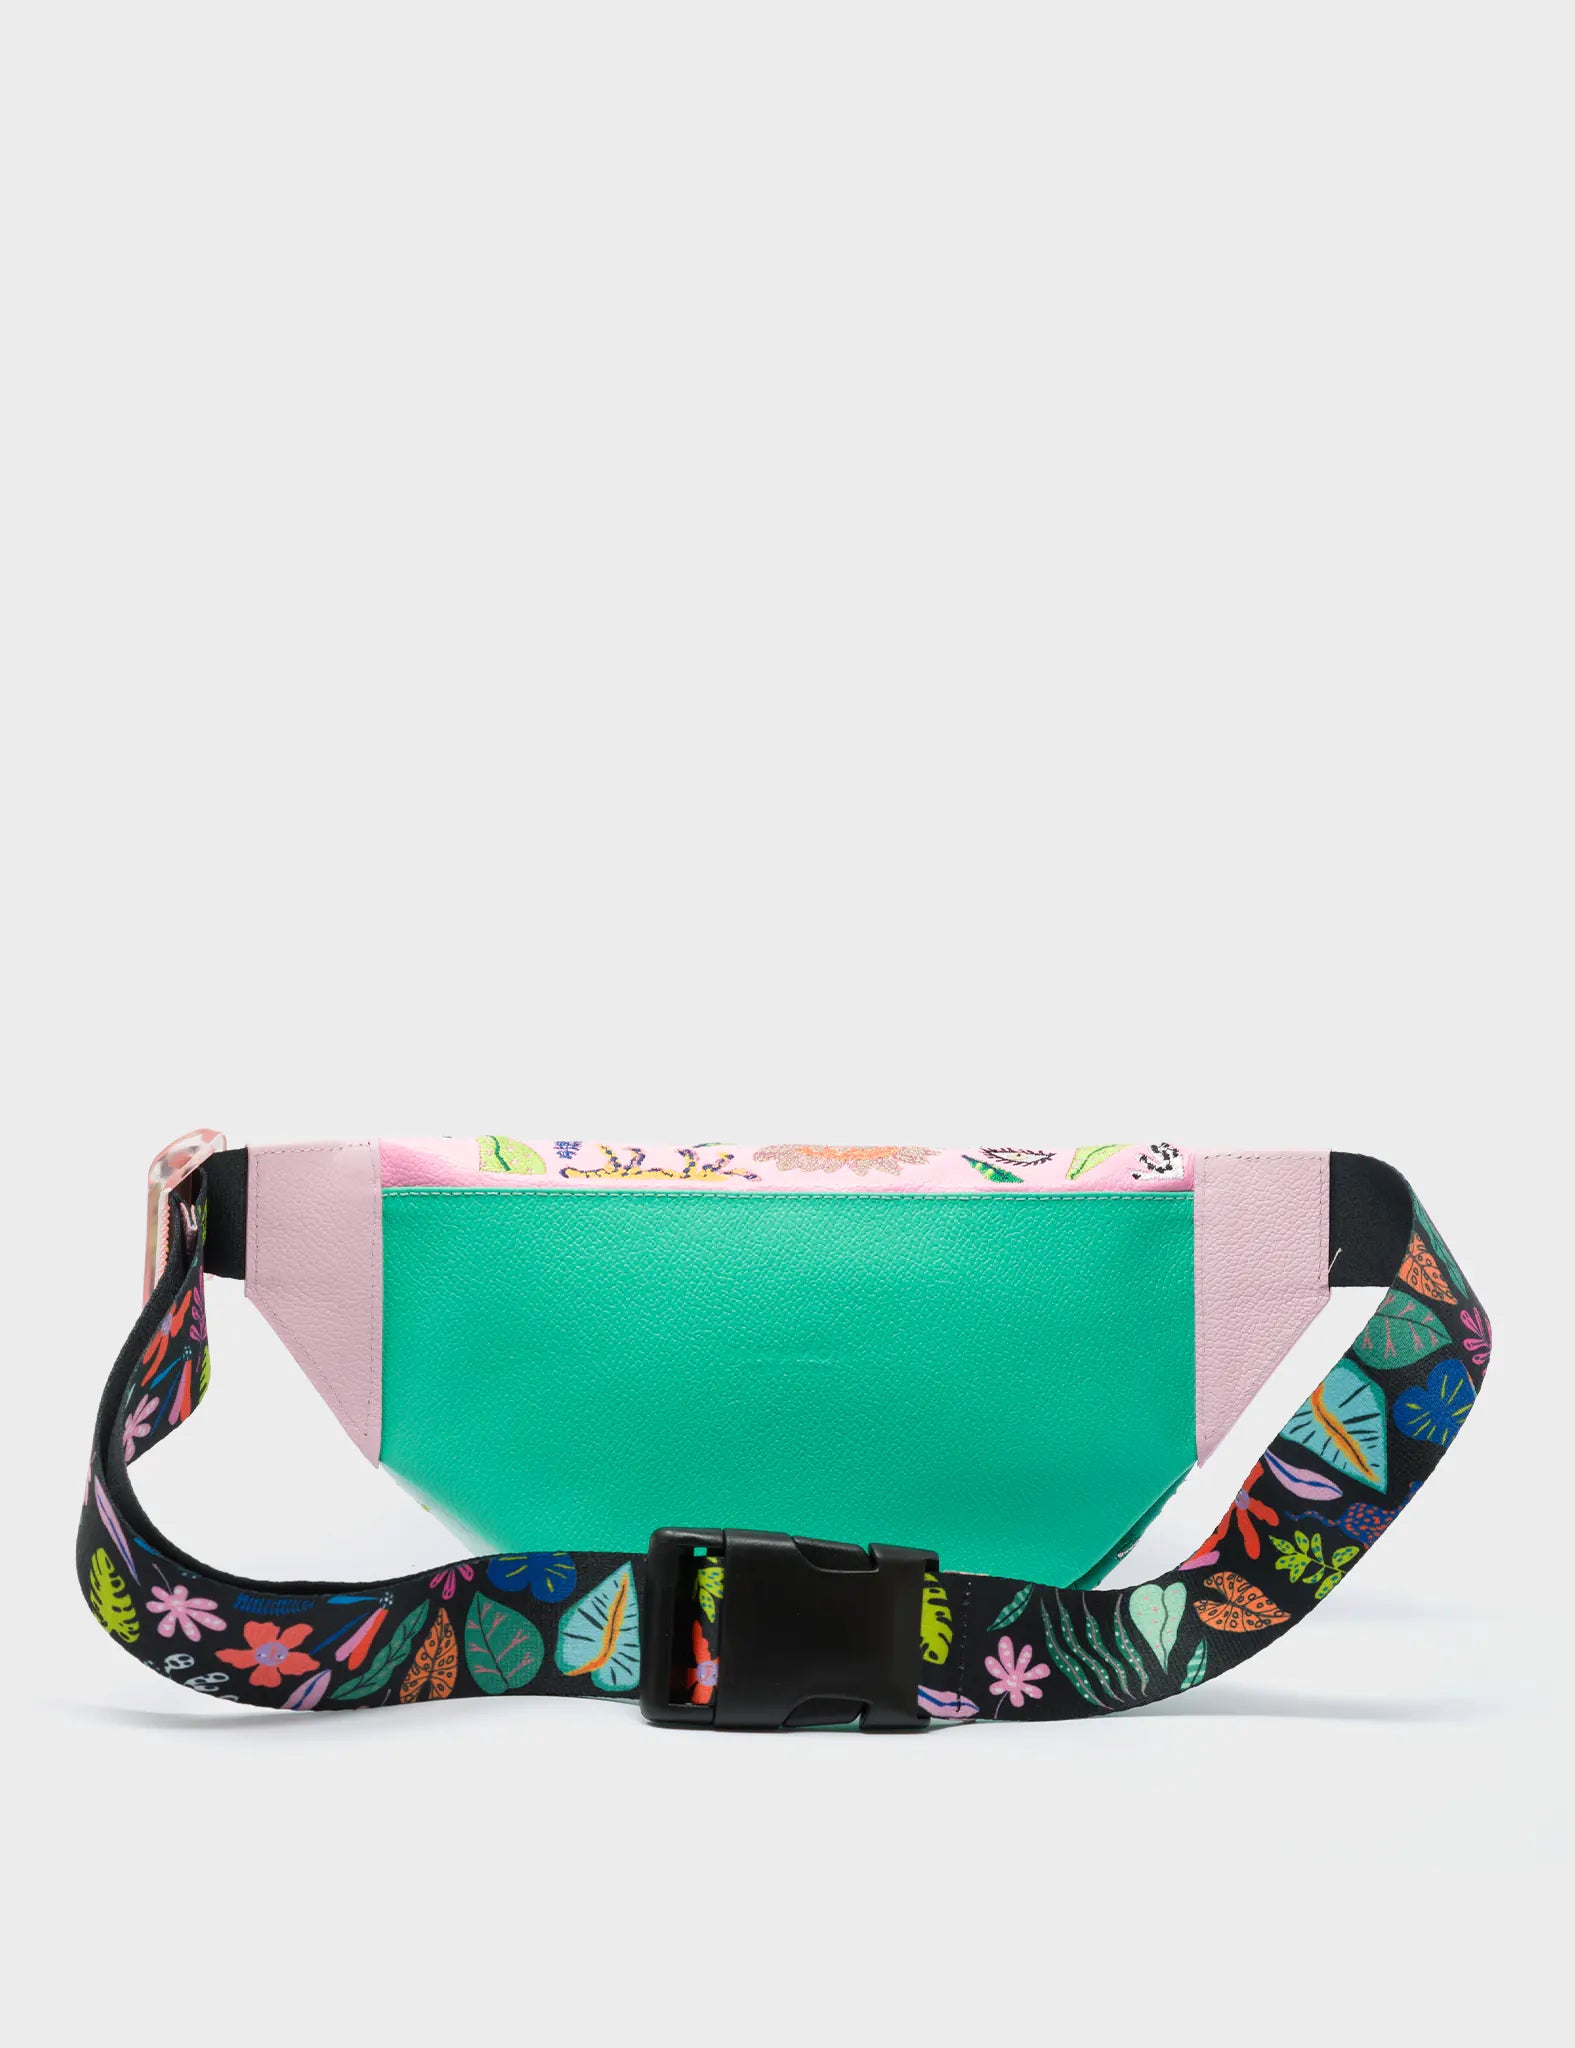 Harold Fanny Pack Green And Lilac Leather - El Trópico Embroidery Design - Back 